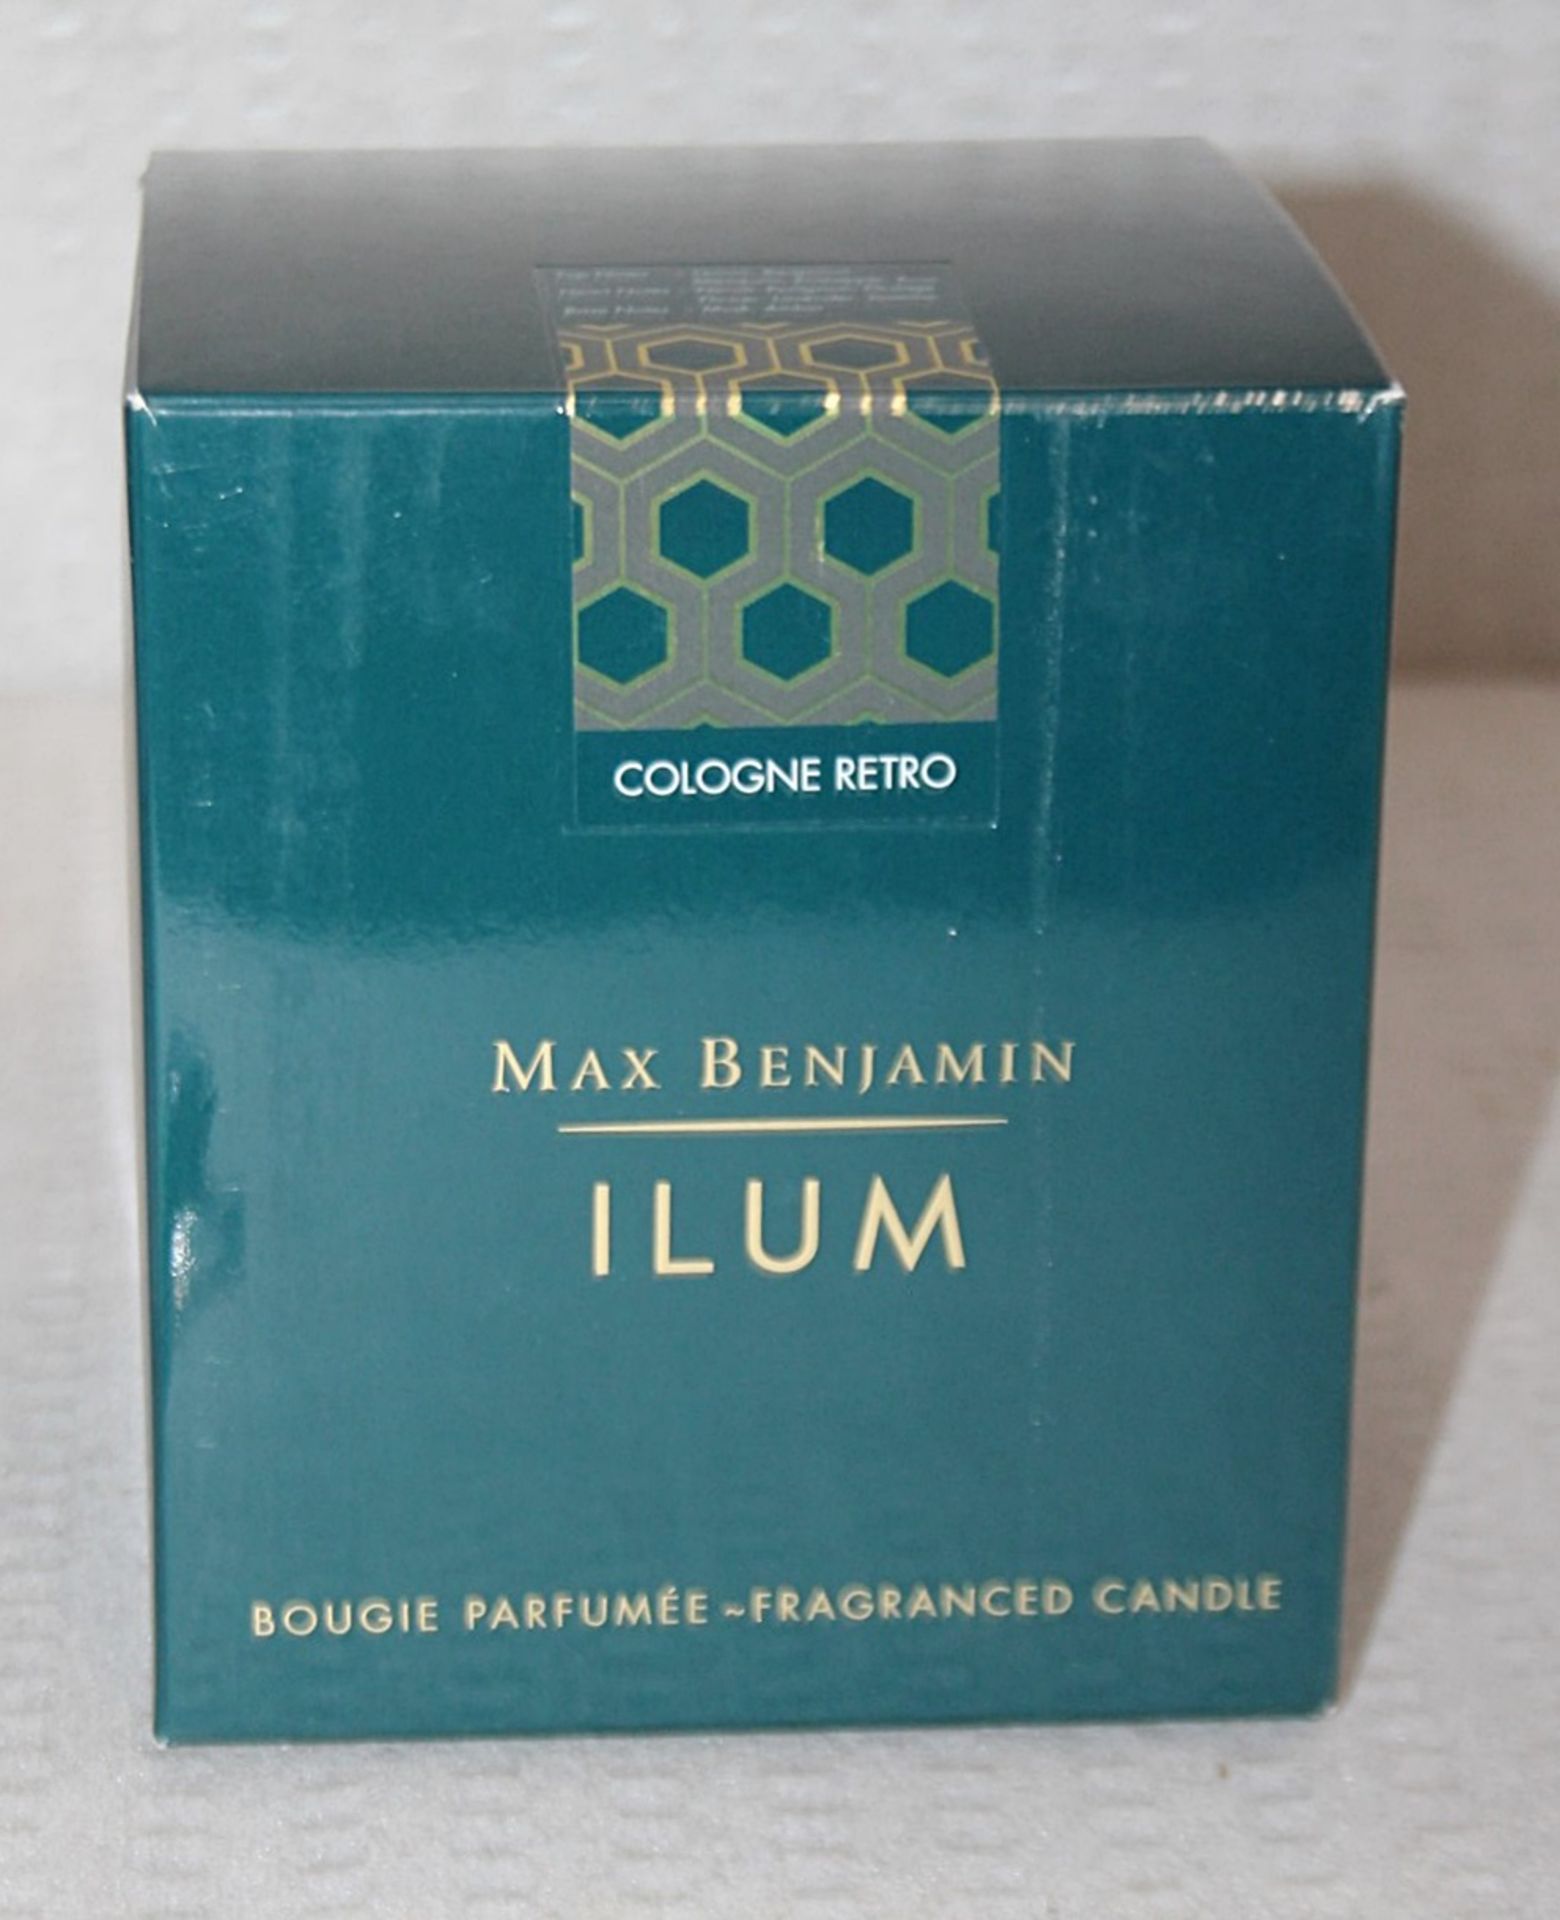 1 x MAX BENJAMIN 'Ilum Cologne Retro' Luxury Scented Candle (715g) - Boxed Stock - RRP £89.95 - Image 2 of 10